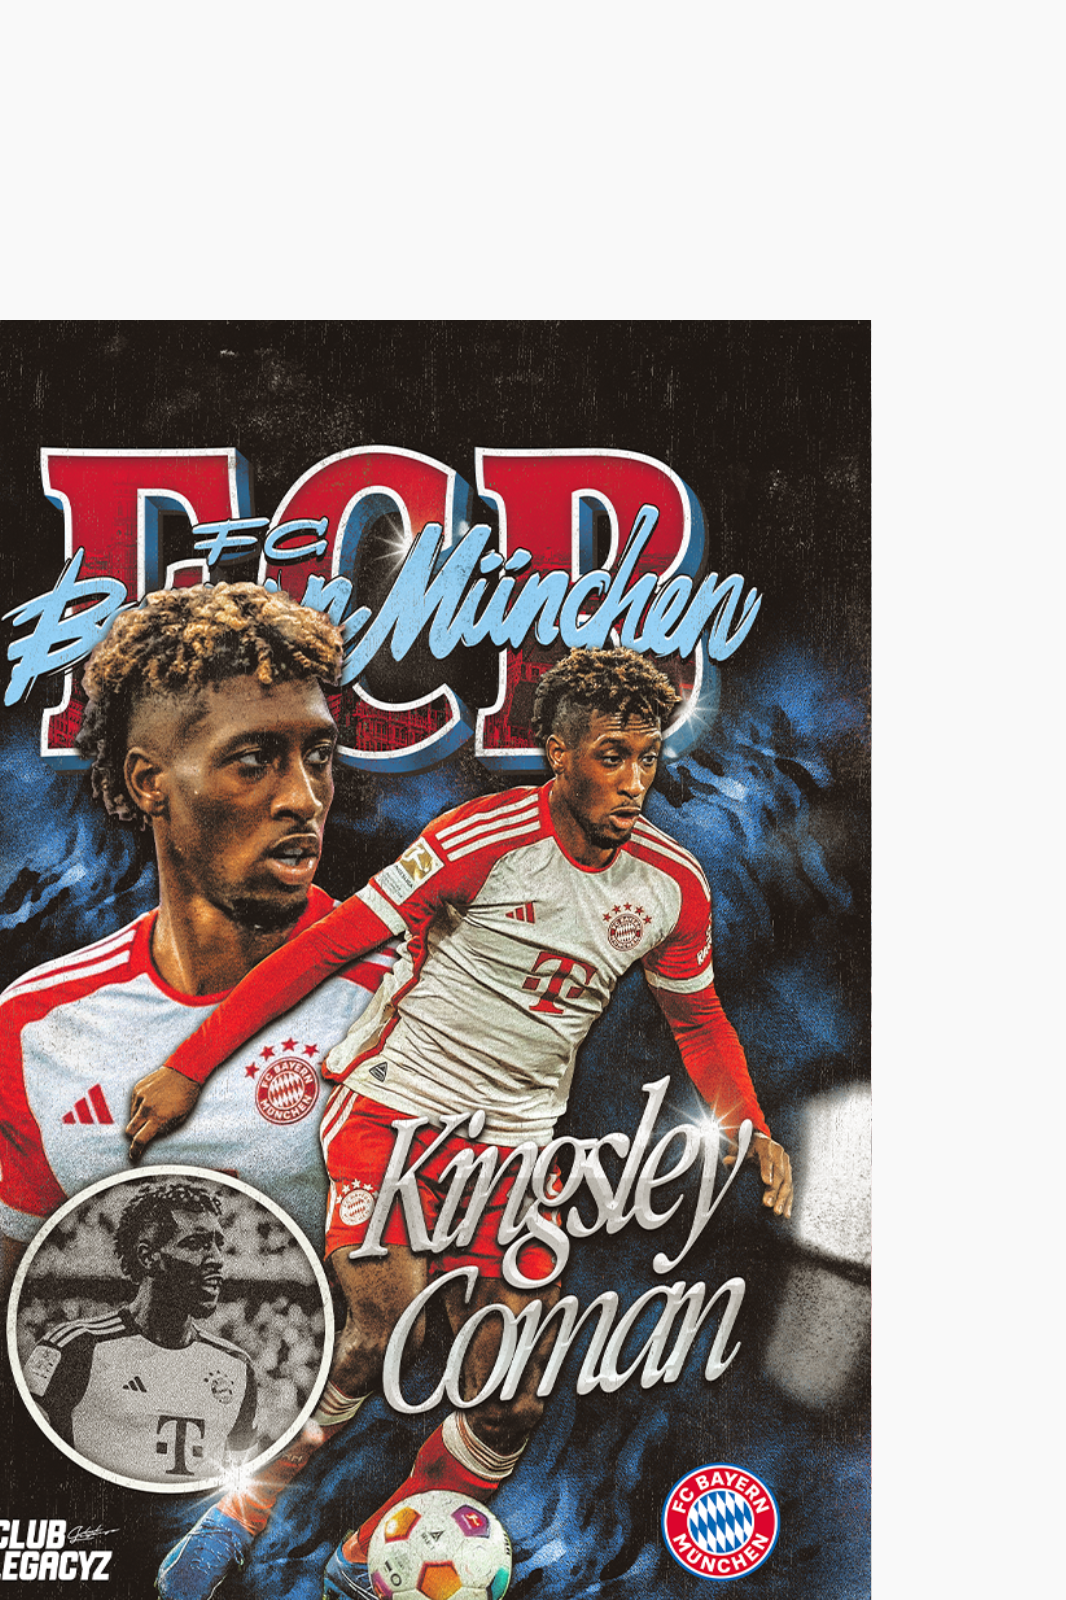 FC Bayern München - Kingsley Coman Bootleg Poster limited to 100